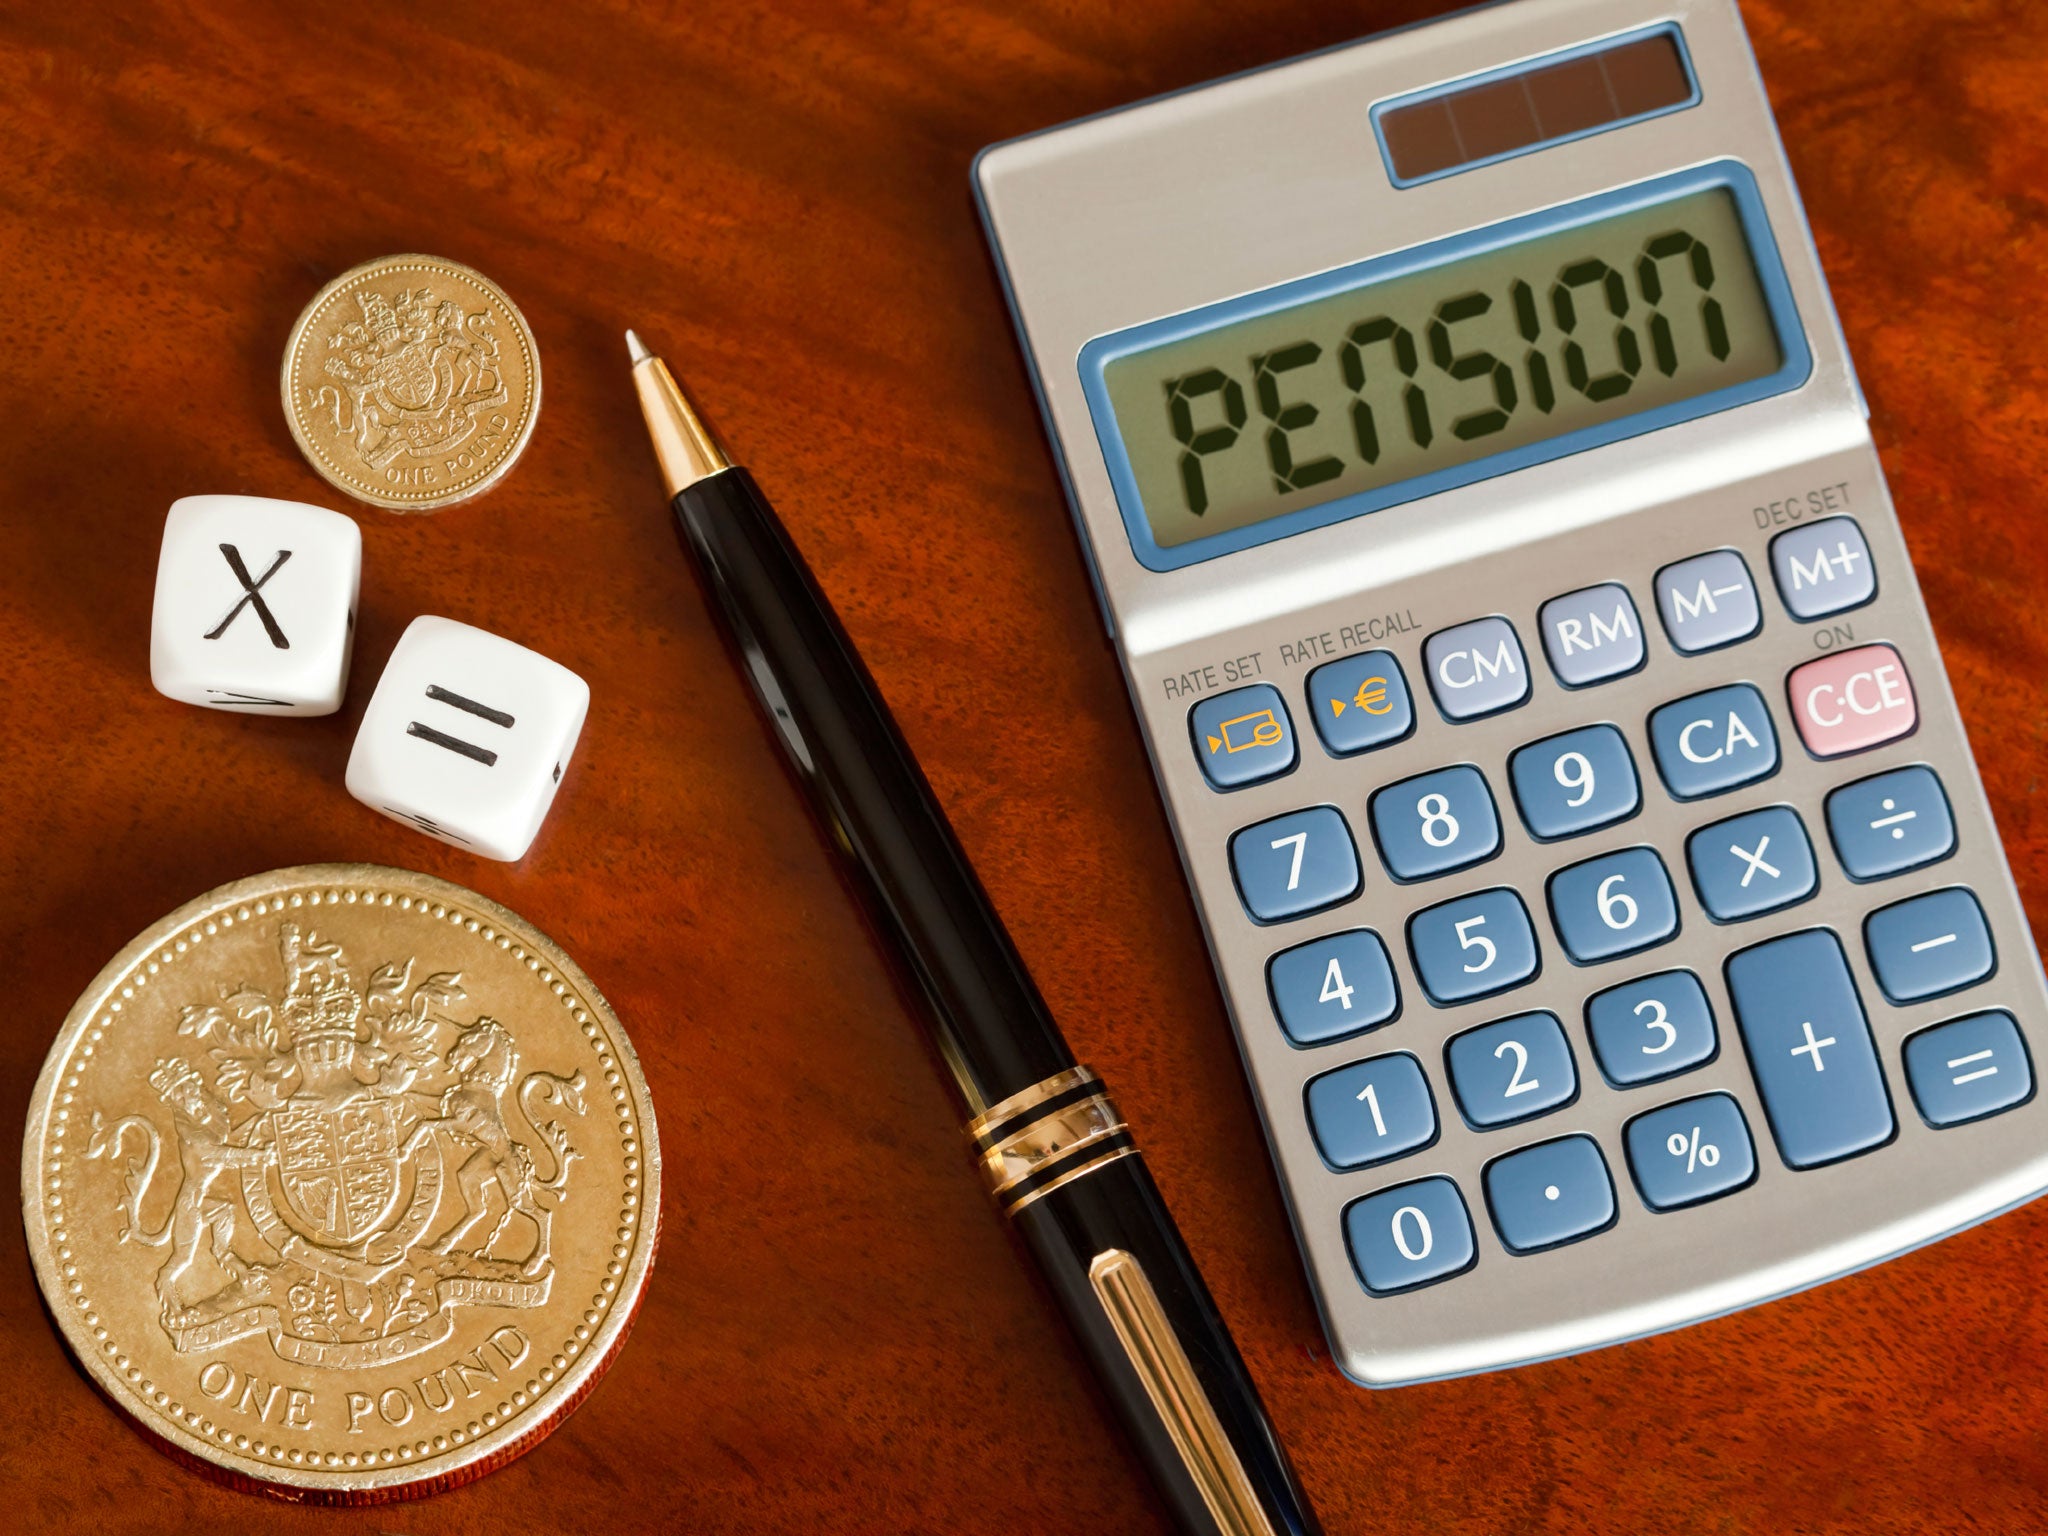 The state pension has always been a burden to future generations since inception